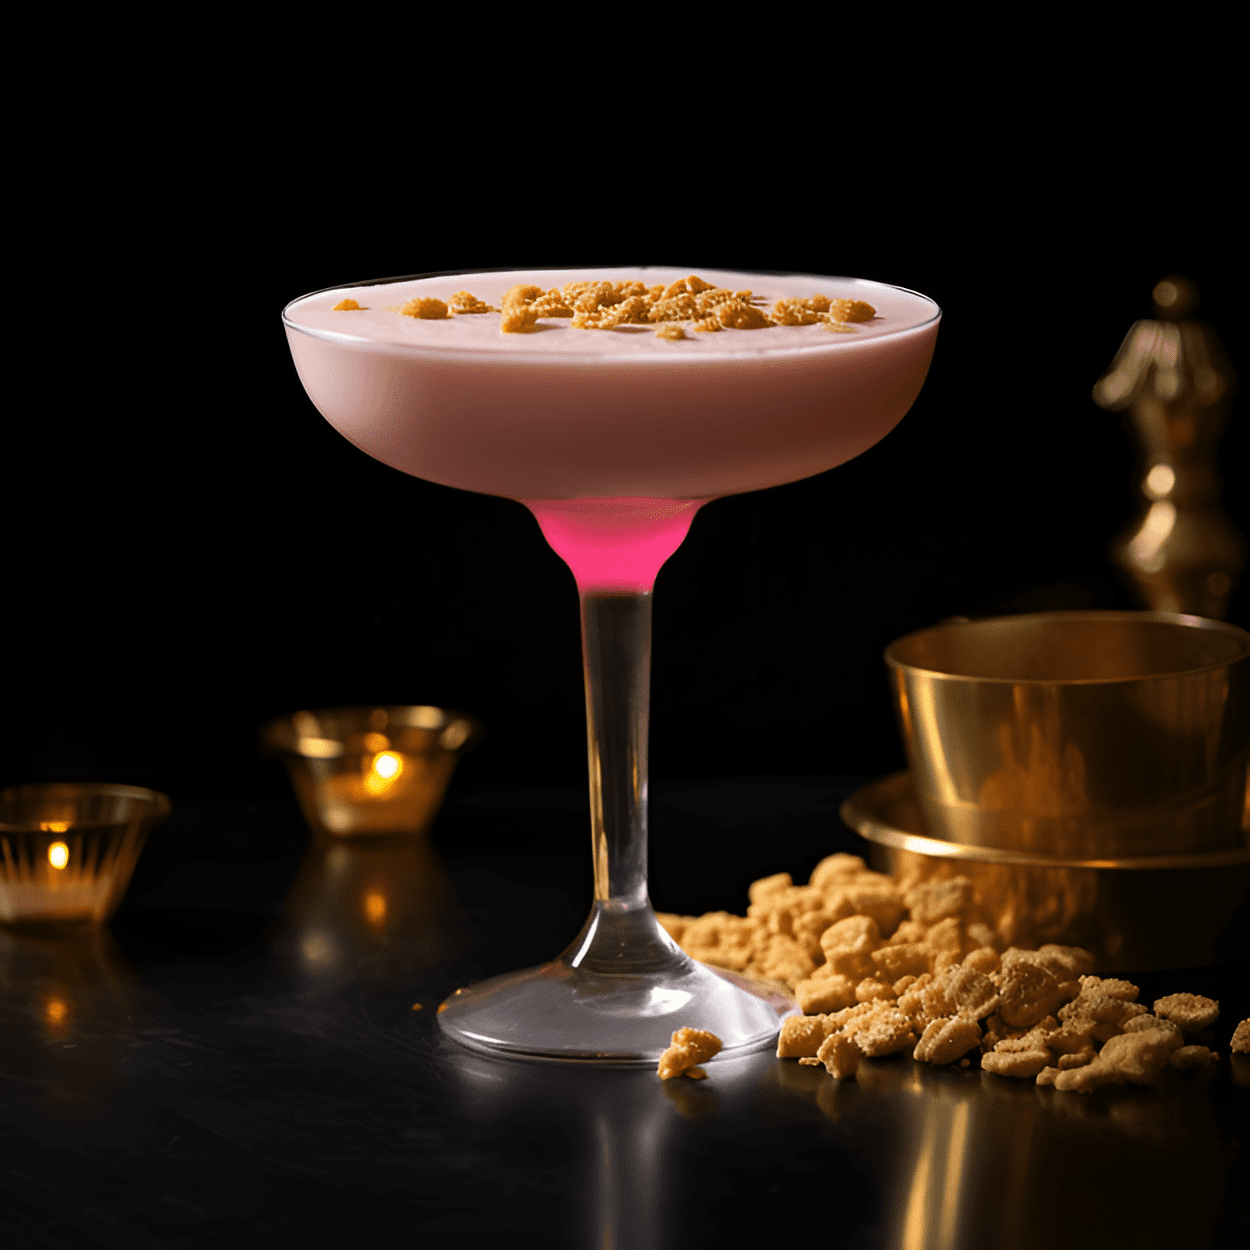 Captain Crunch Cocktail Recipe - The Captain Crunch cocktail is sweet, creamy, and fruity. It has a distinct taste of vanilla and berries, with a hint of rum. The drink is smooth and easy to drink, making it a perfect dessert cocktail.